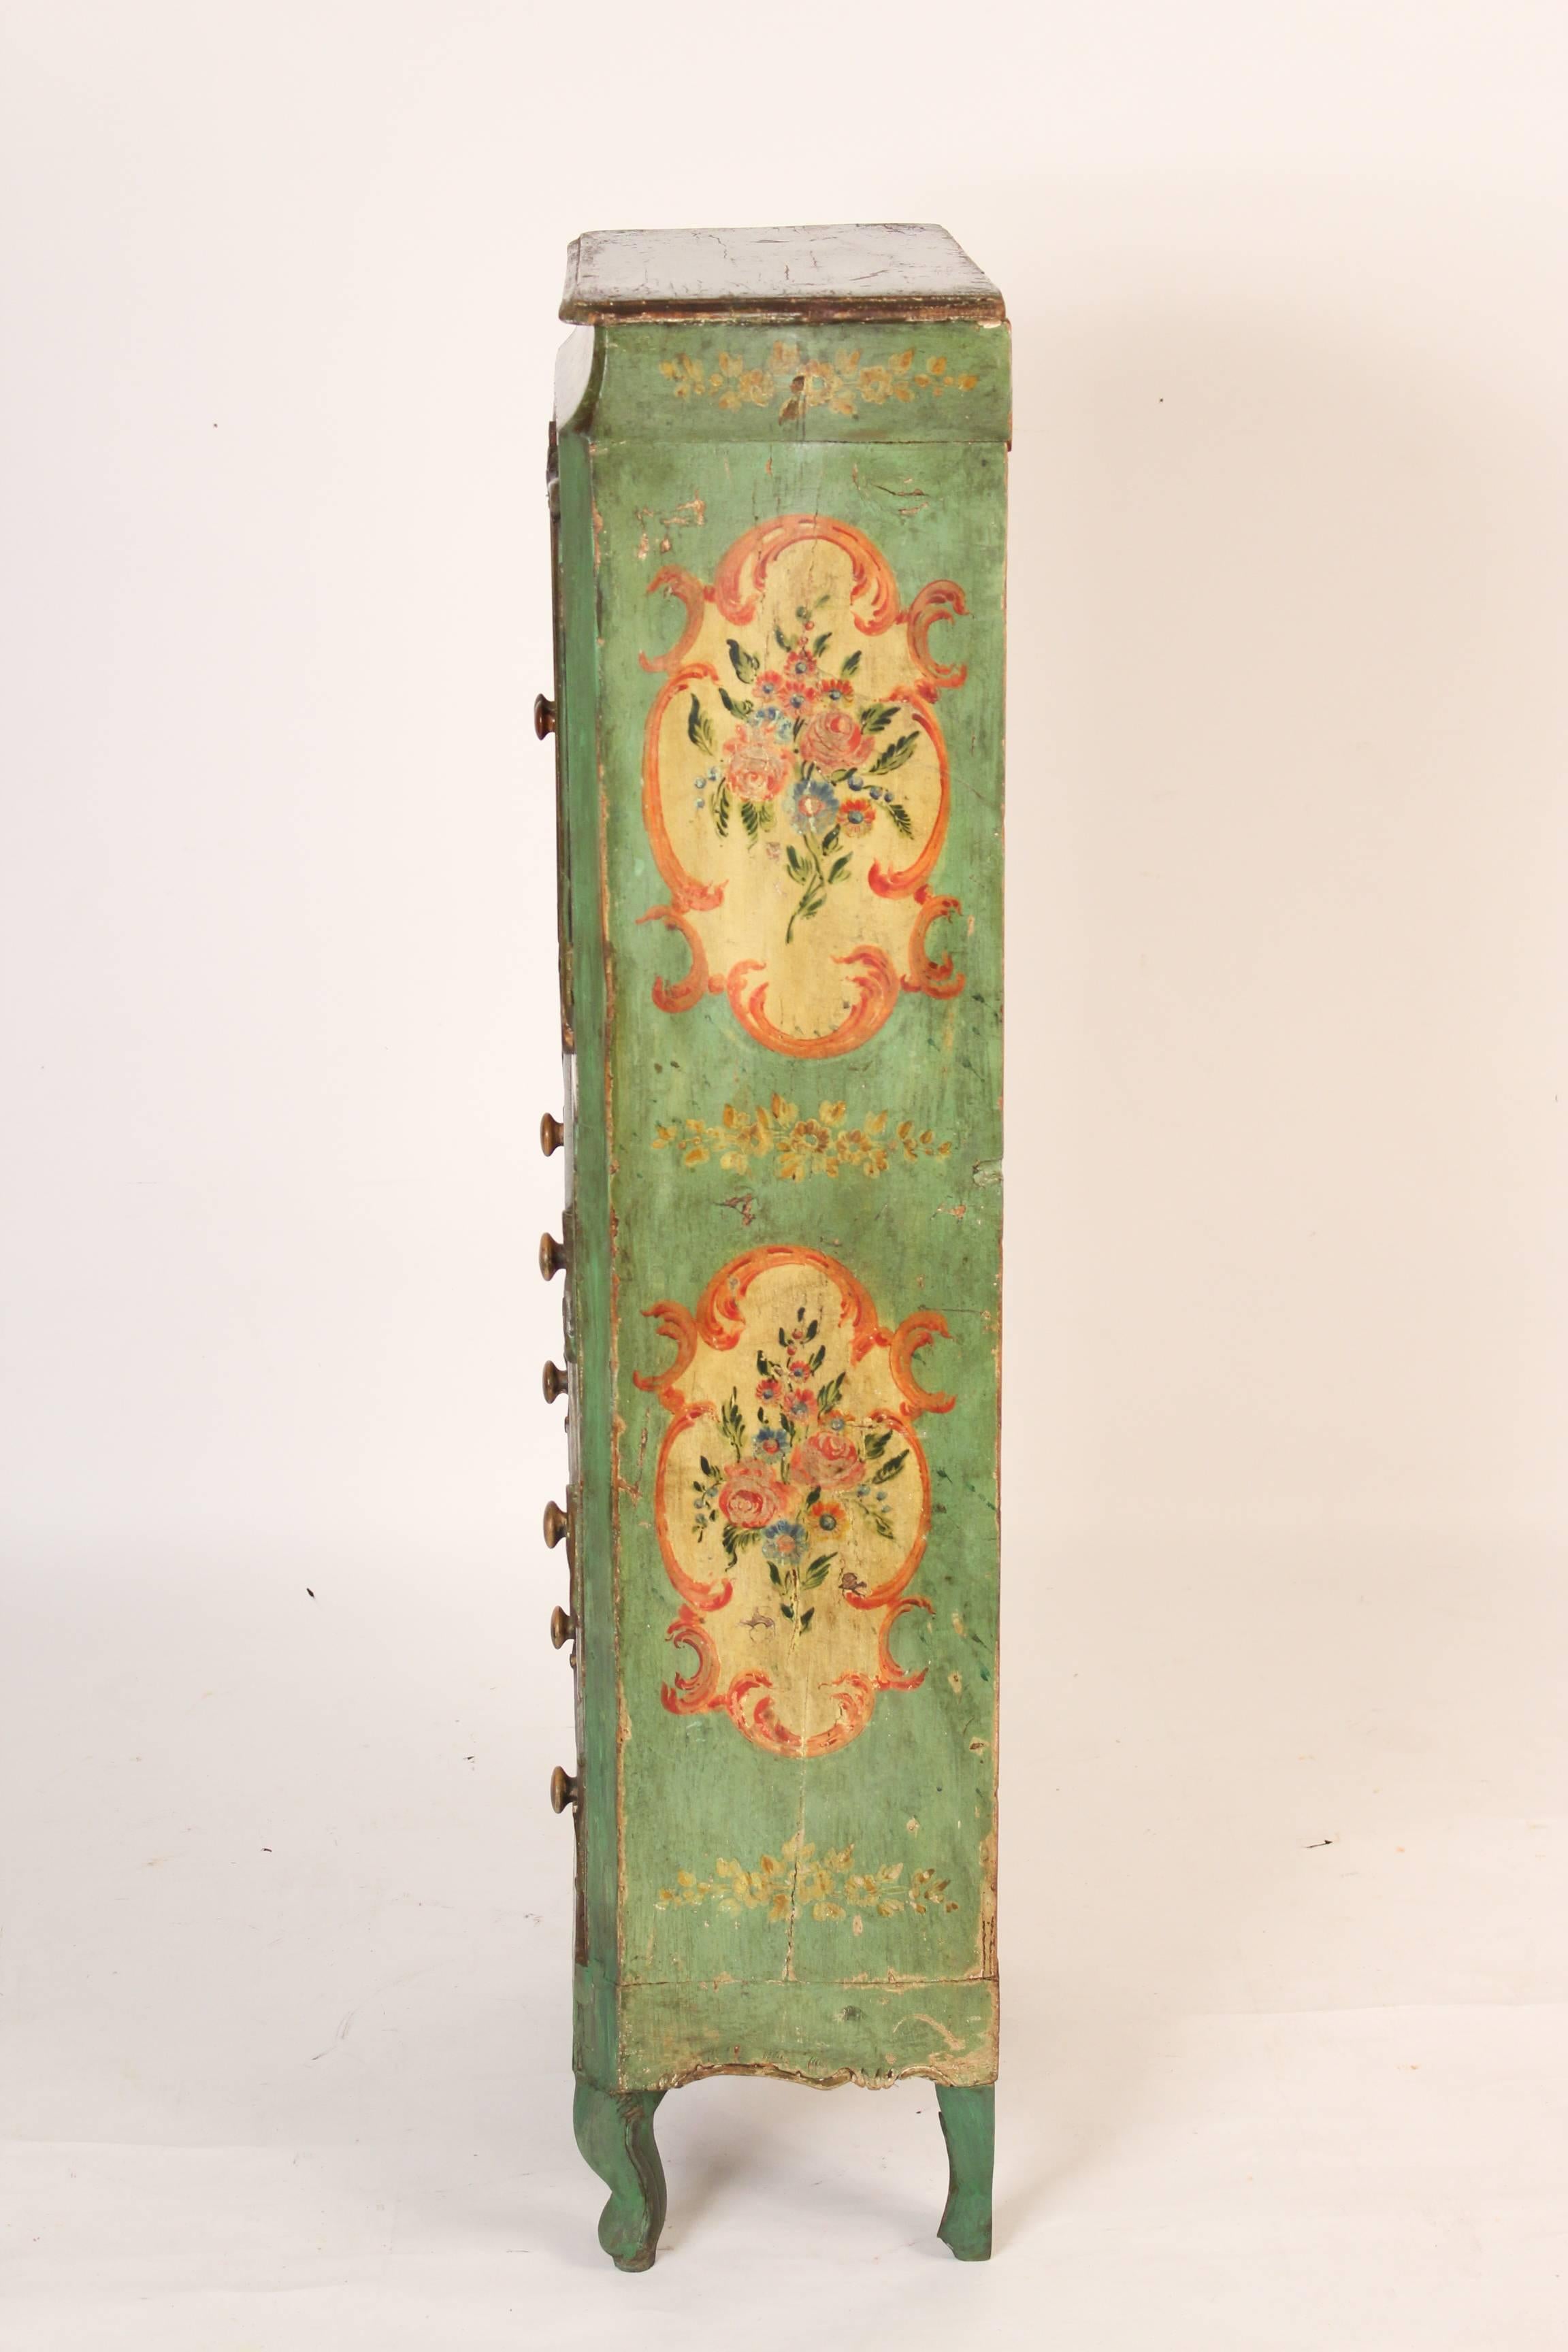 Italian Louis XV style painted cabinet with floral painted drawers and doors, late 19th century.